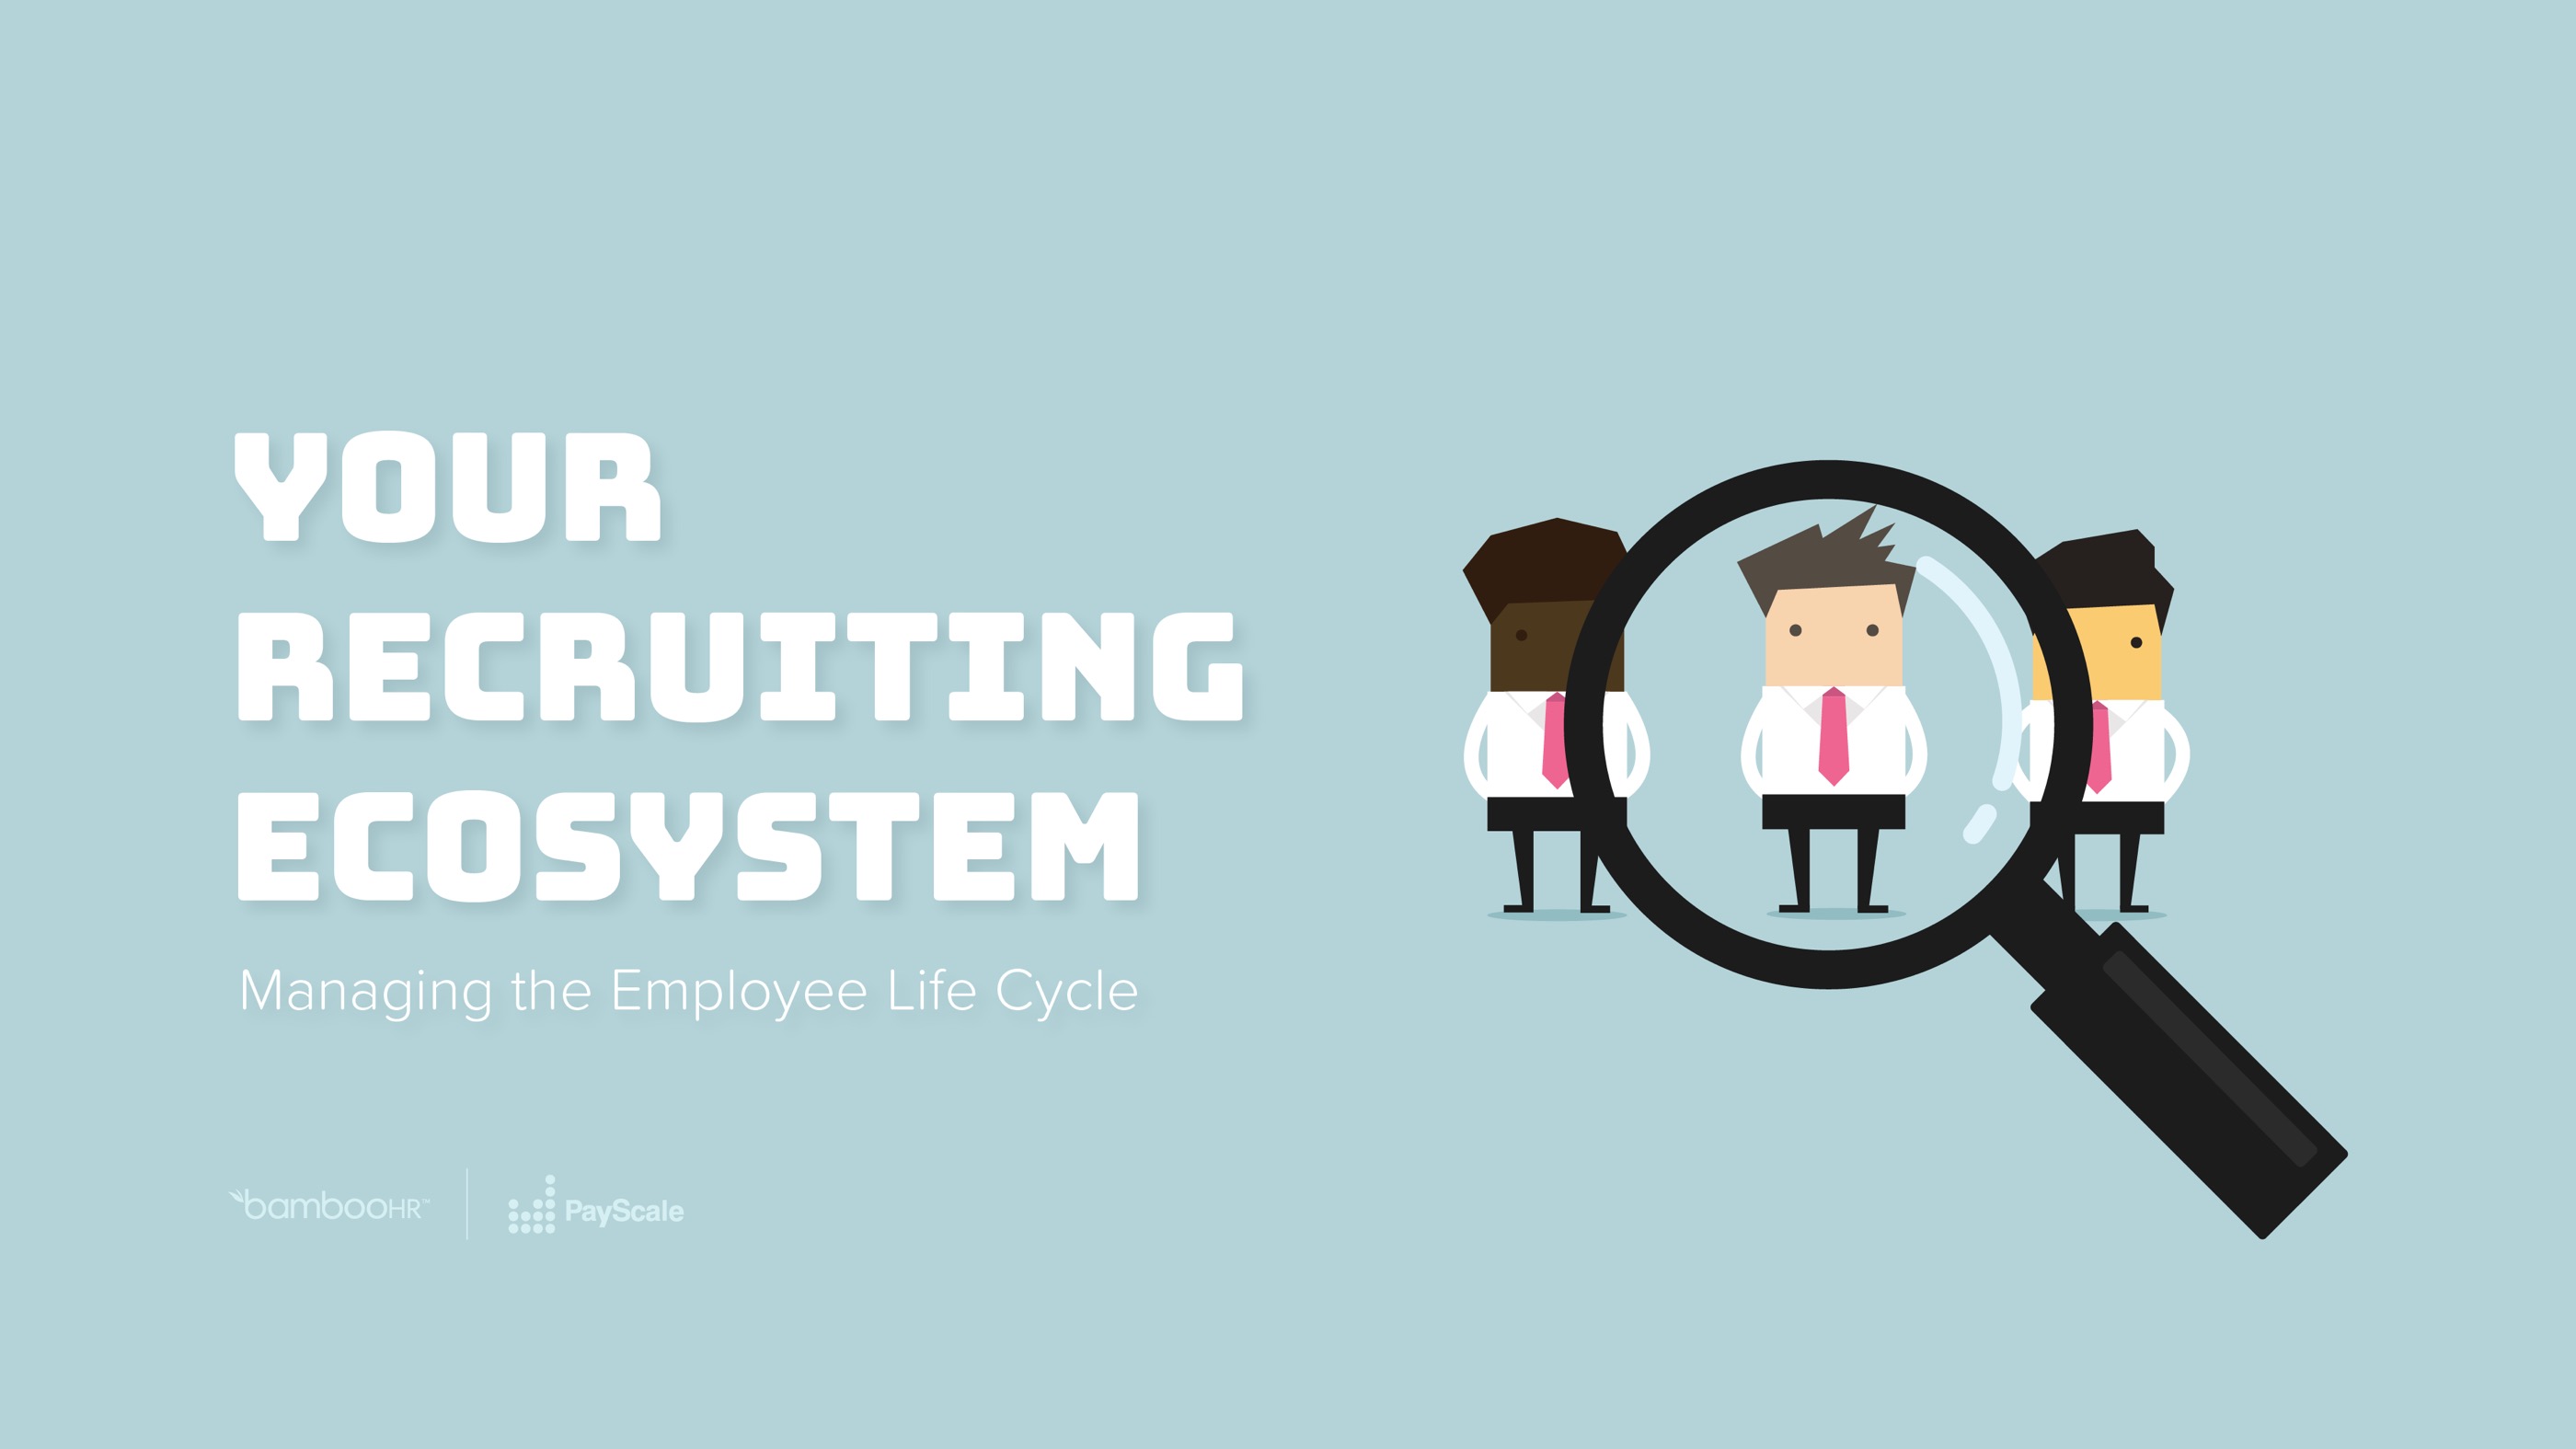 Your Recruiting Ecosystem: Managing the Employee Life Cycle